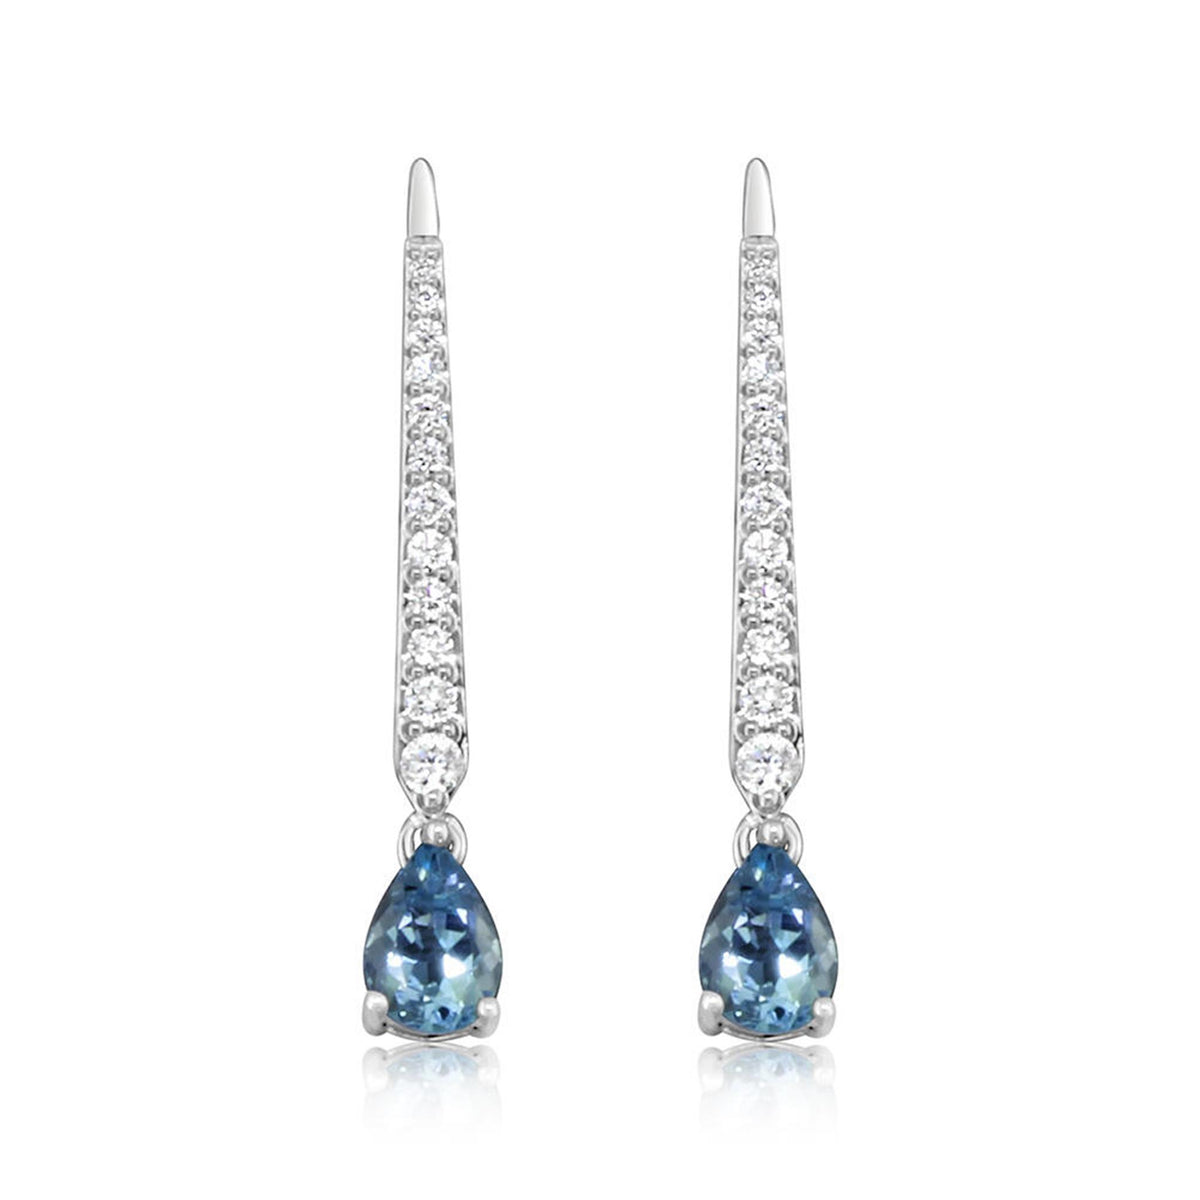 14Kt White Gold Earrings with 0.68ct Aquamarines